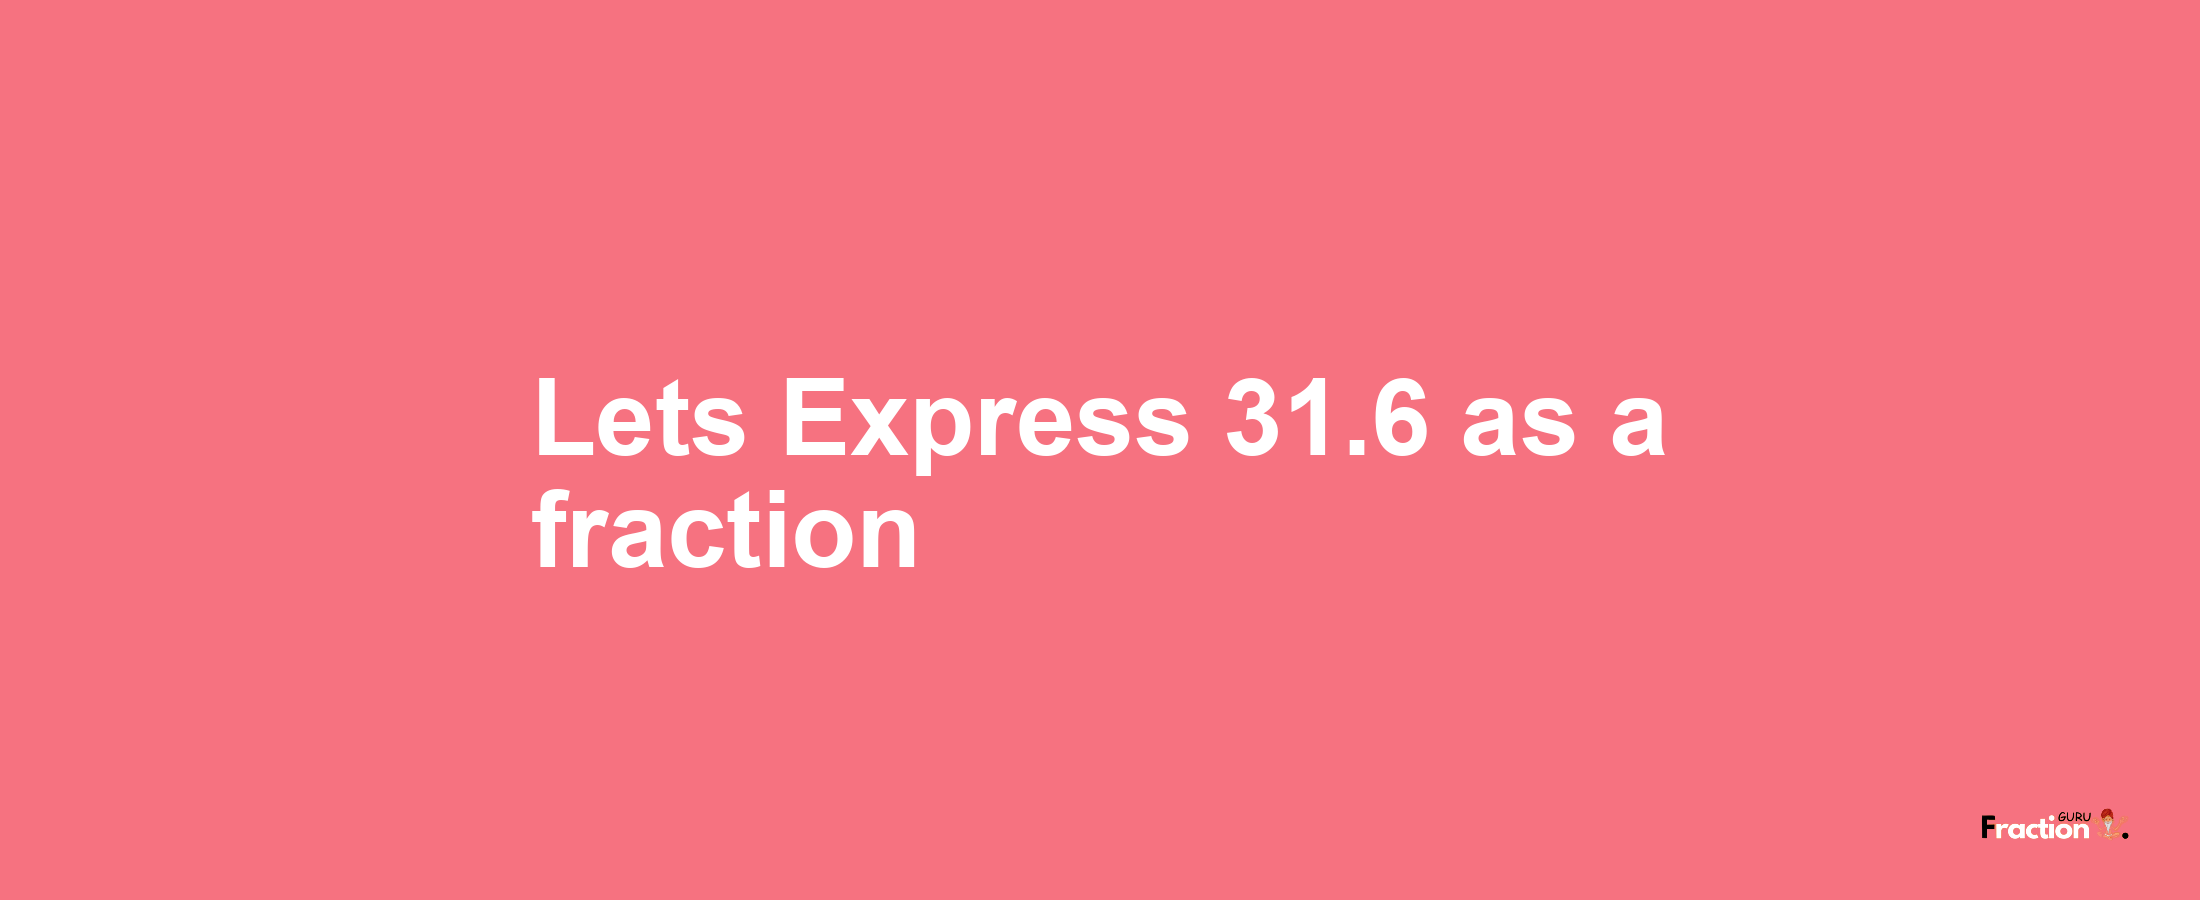 Lets Express 31.6 as afraction